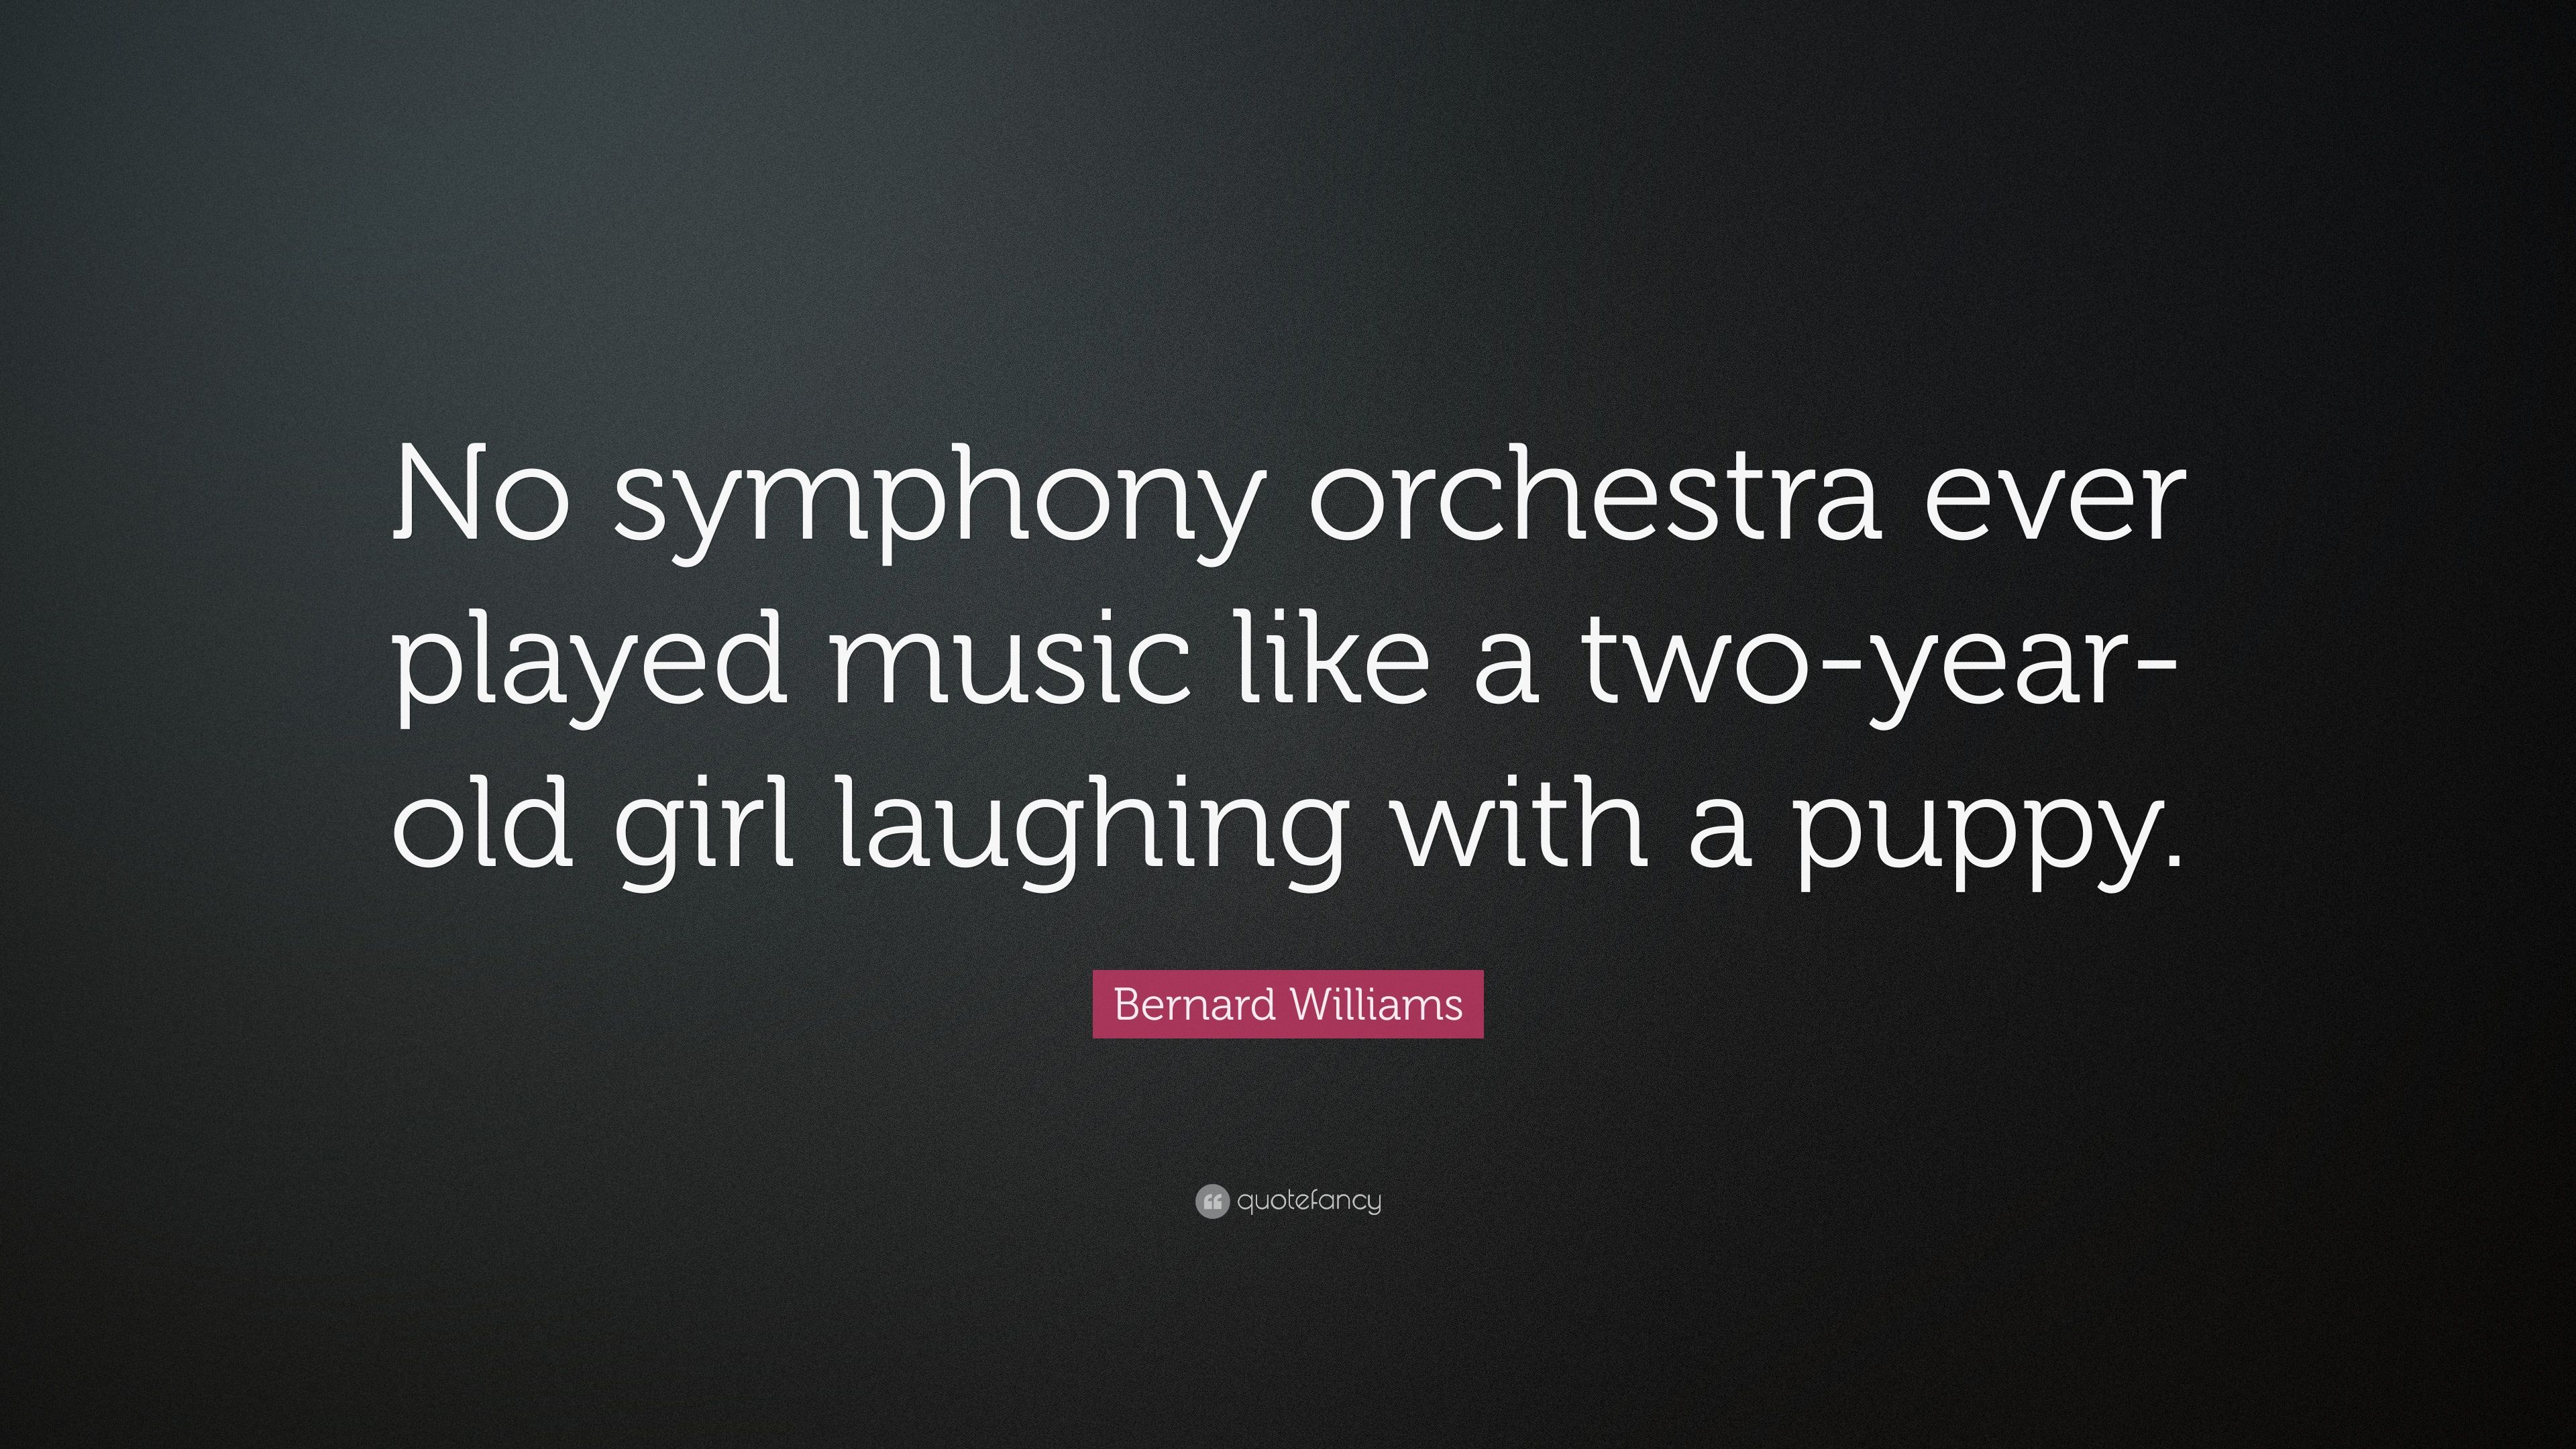 Bernard Williams Quote: “No symphony orchestra ever played music